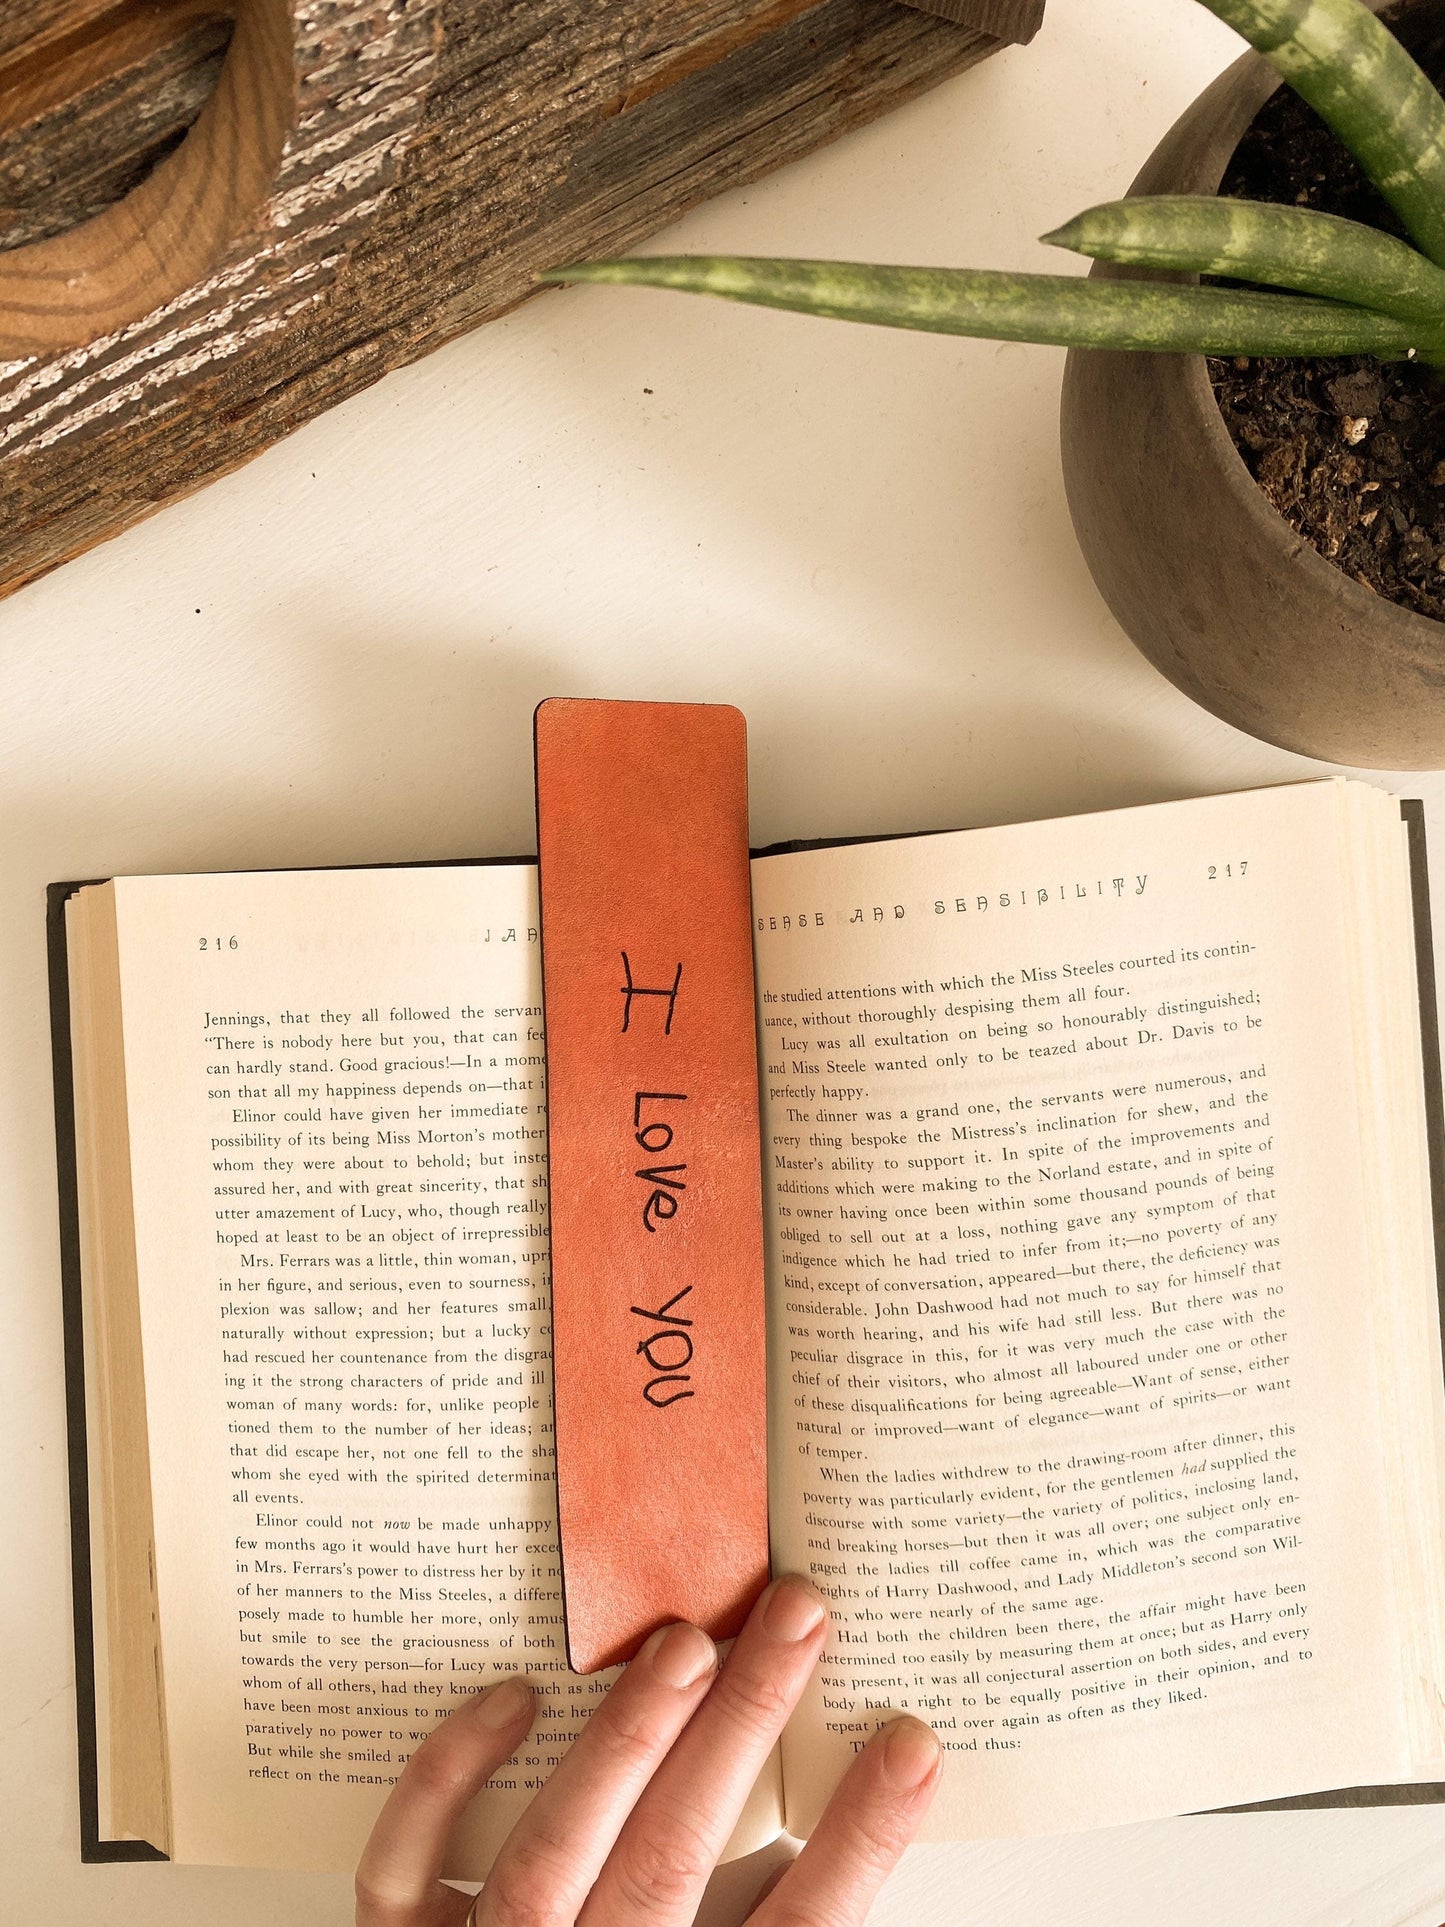 Bookmark with Actual Handwriting